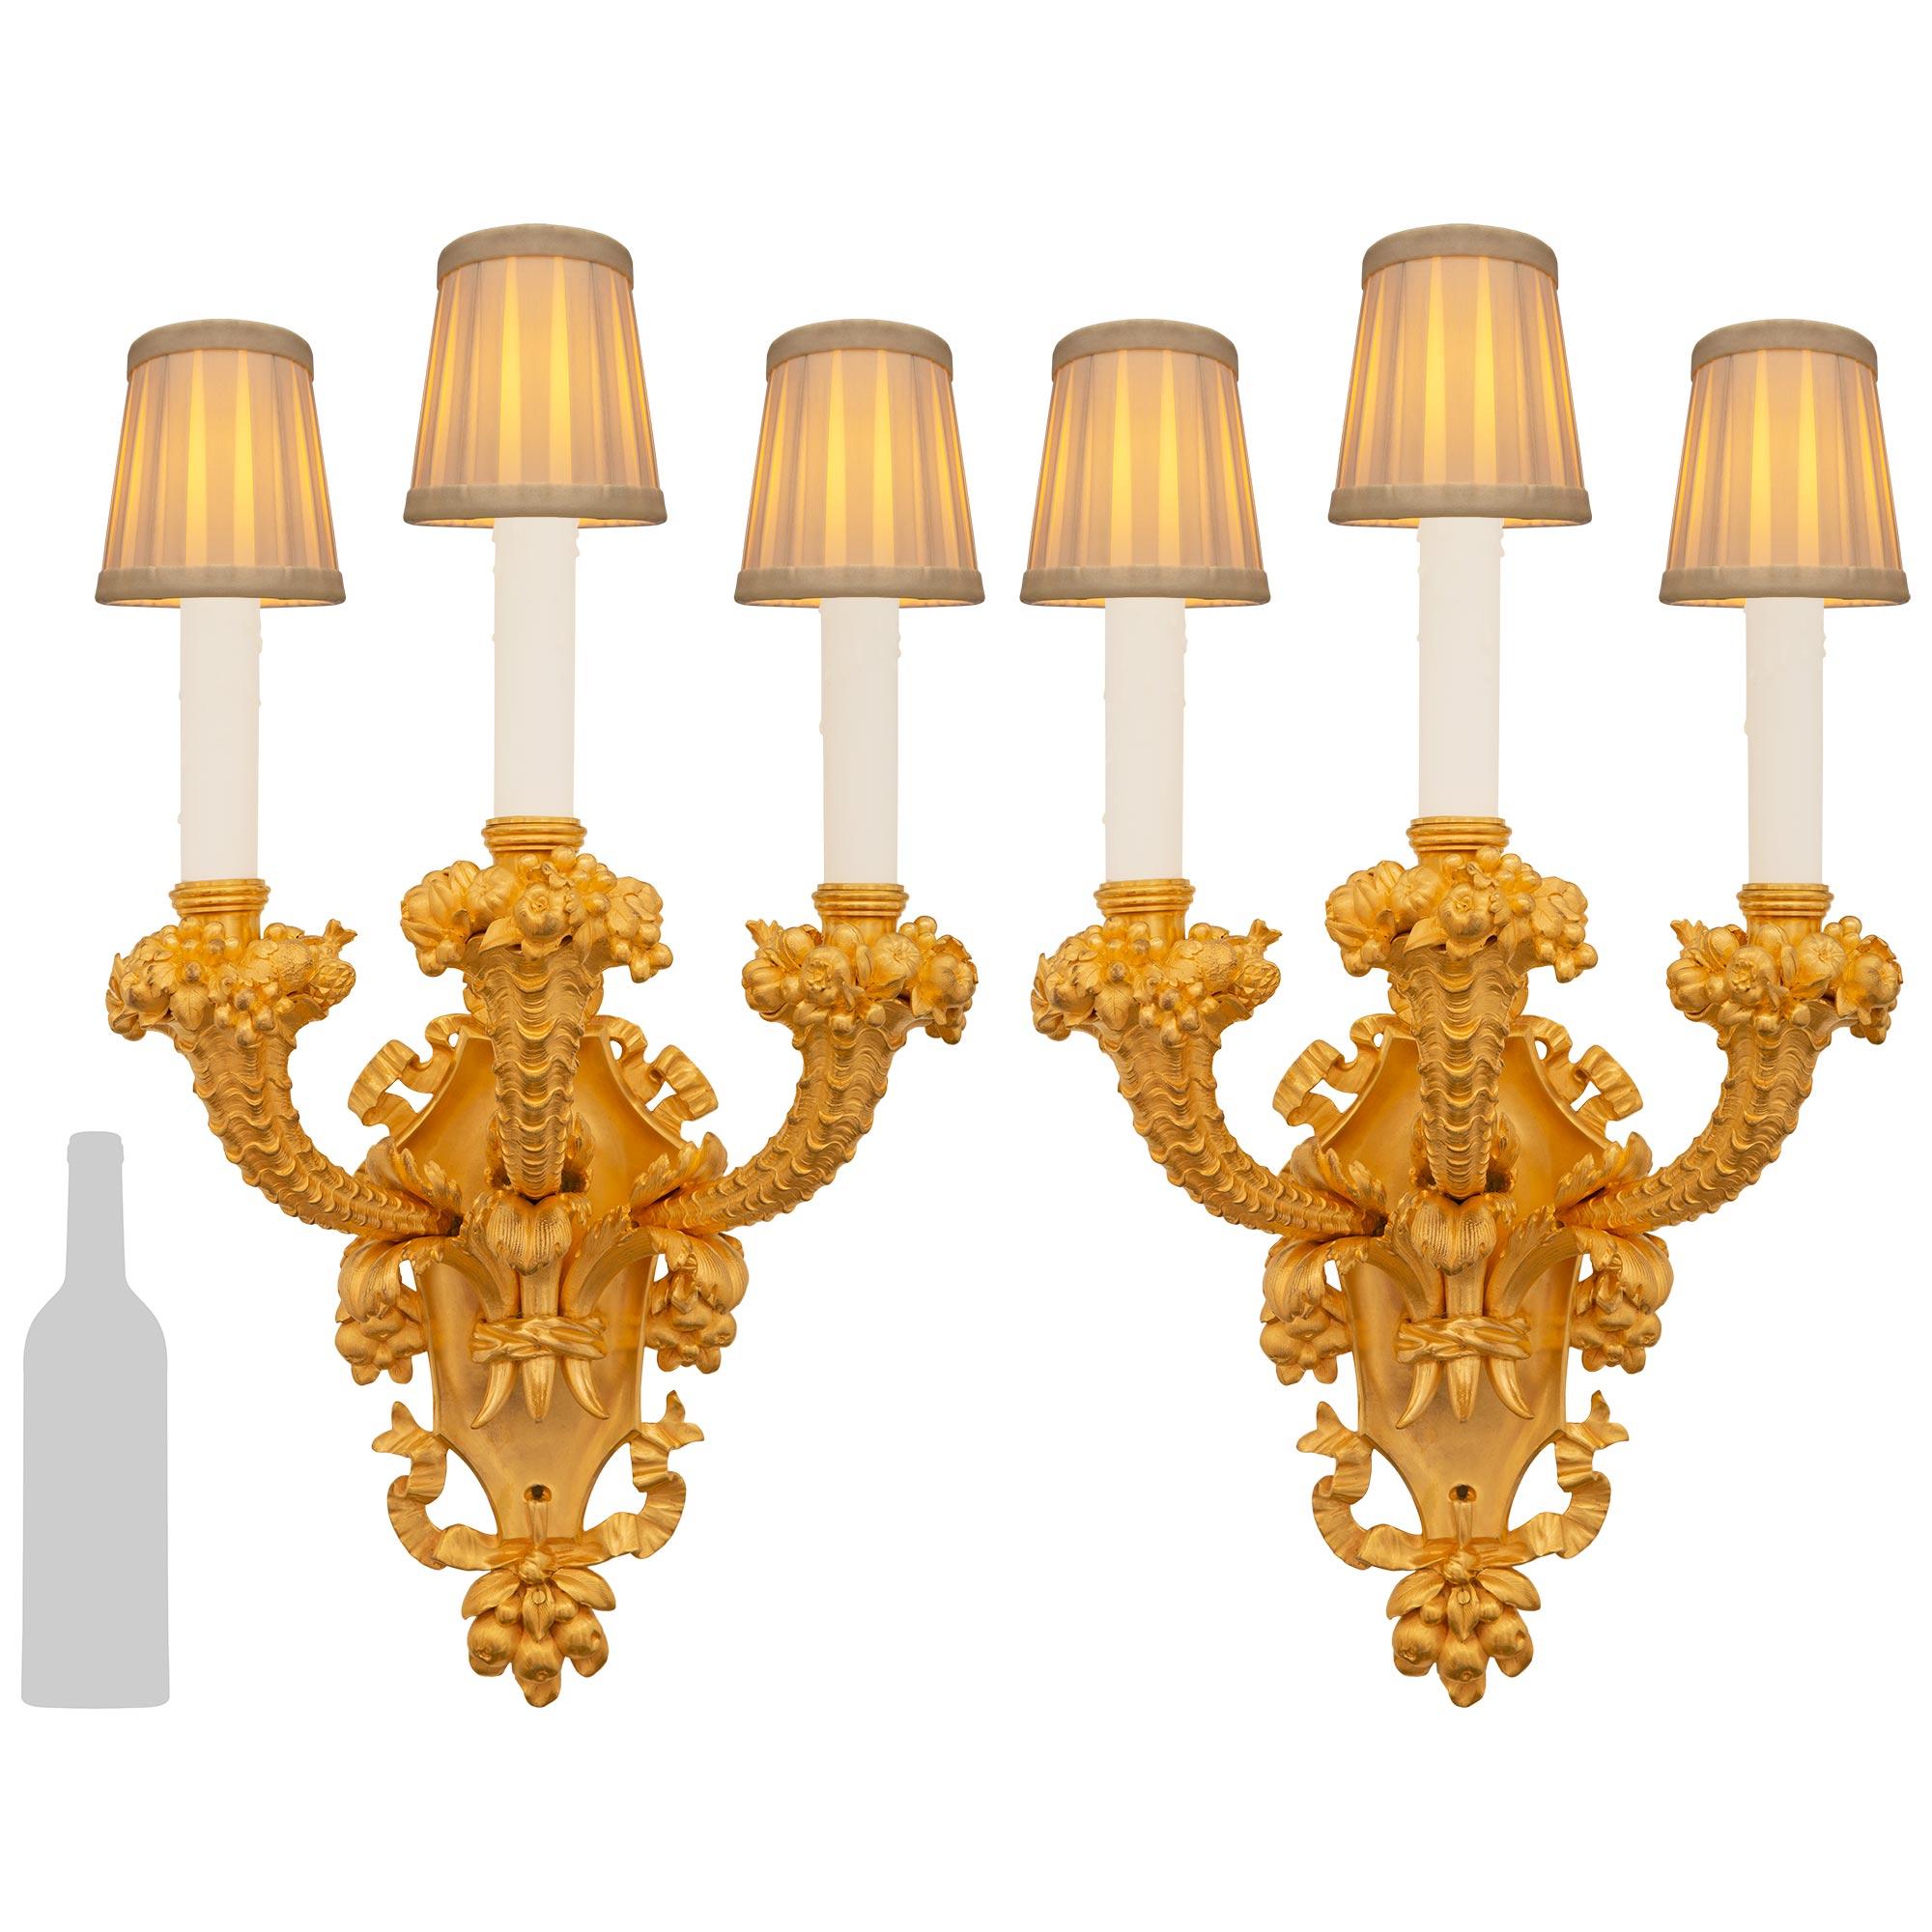 An elegant and high quality pair of French 19th century Louis XVI st. Ormolu sconces, stamped E.F. Caldwell & Co. Each exquisite three arm sconce is centered by a lovely bottom foliate finial tied with a flowing ribbon below the crest shaped back